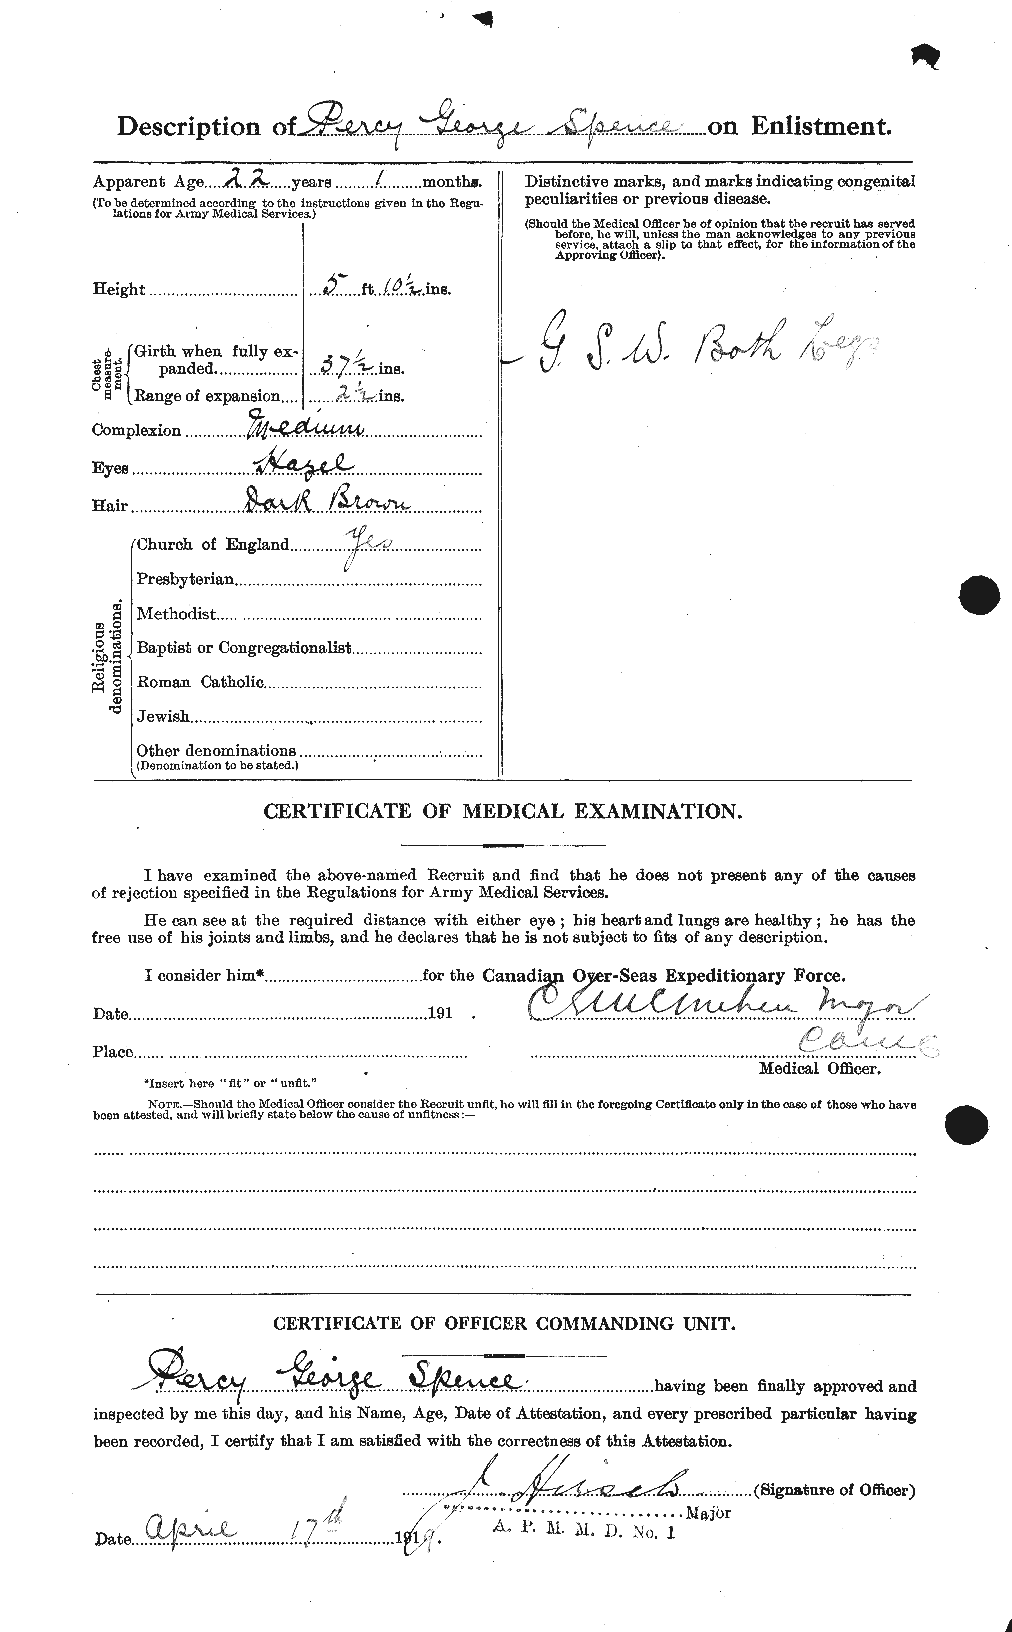 Personnel Records of the First World War - CEF 621404b